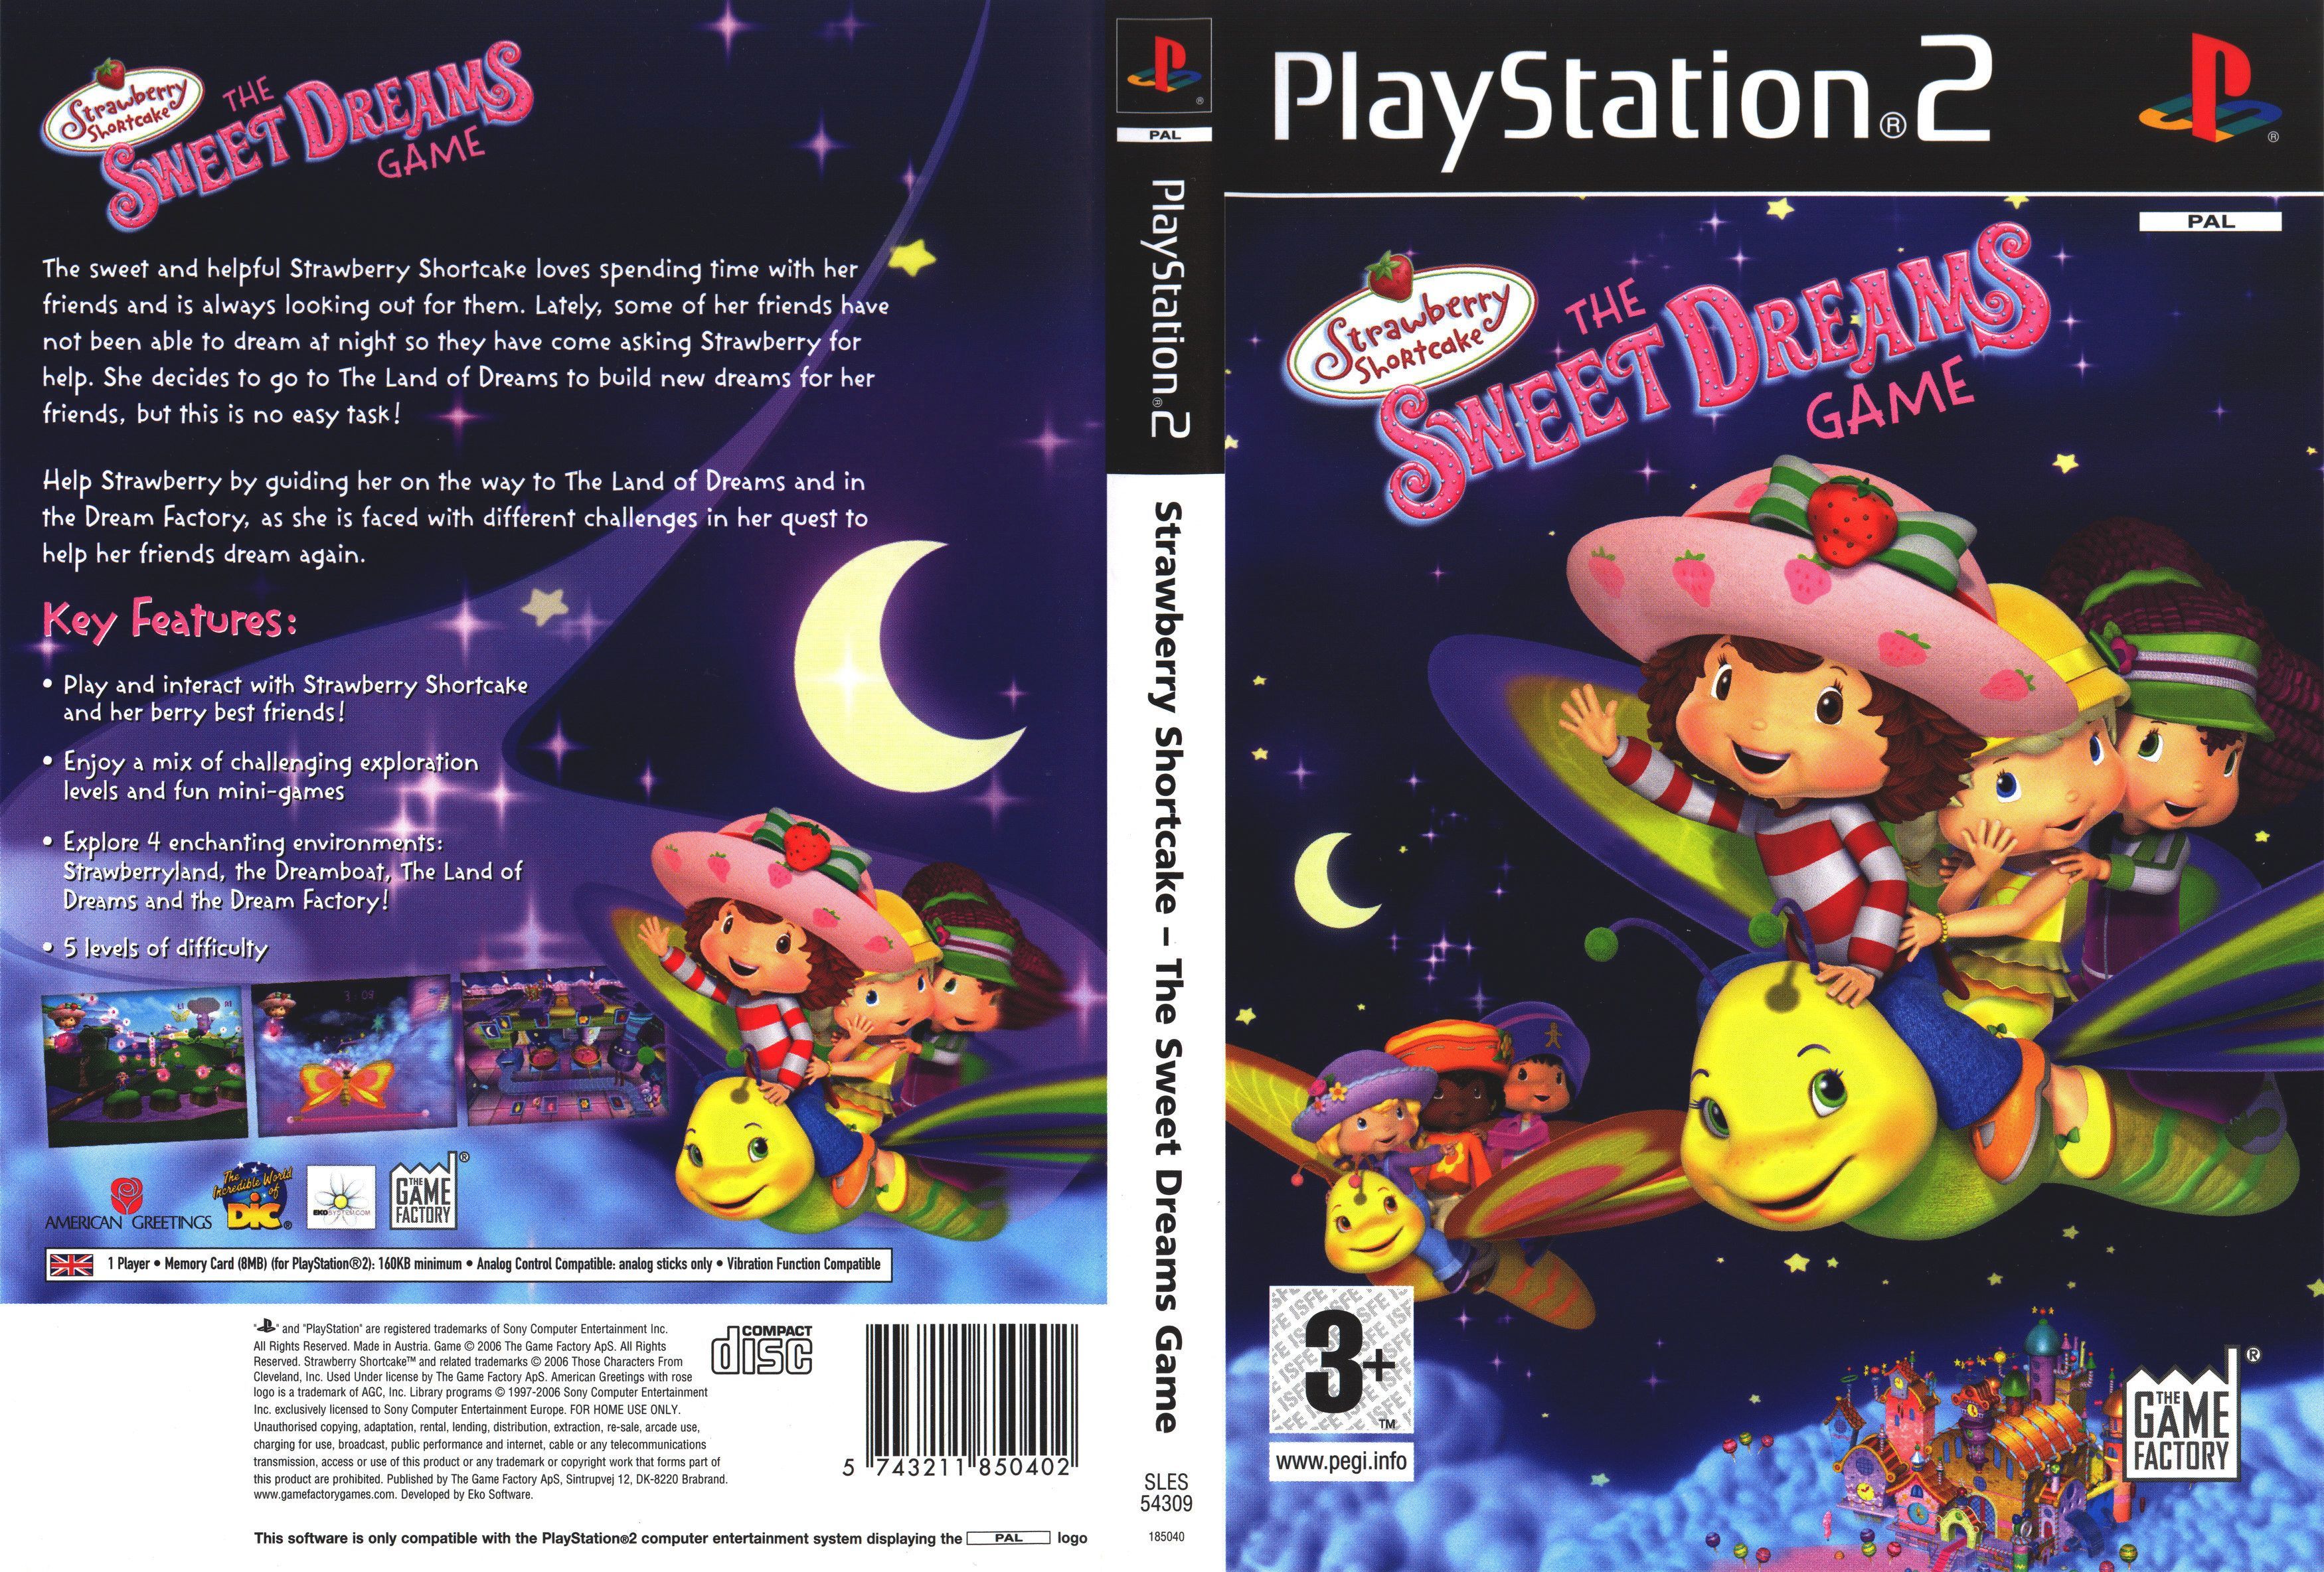 Strawberry Shortcake - The Sweet Dreams Game PSX cover.